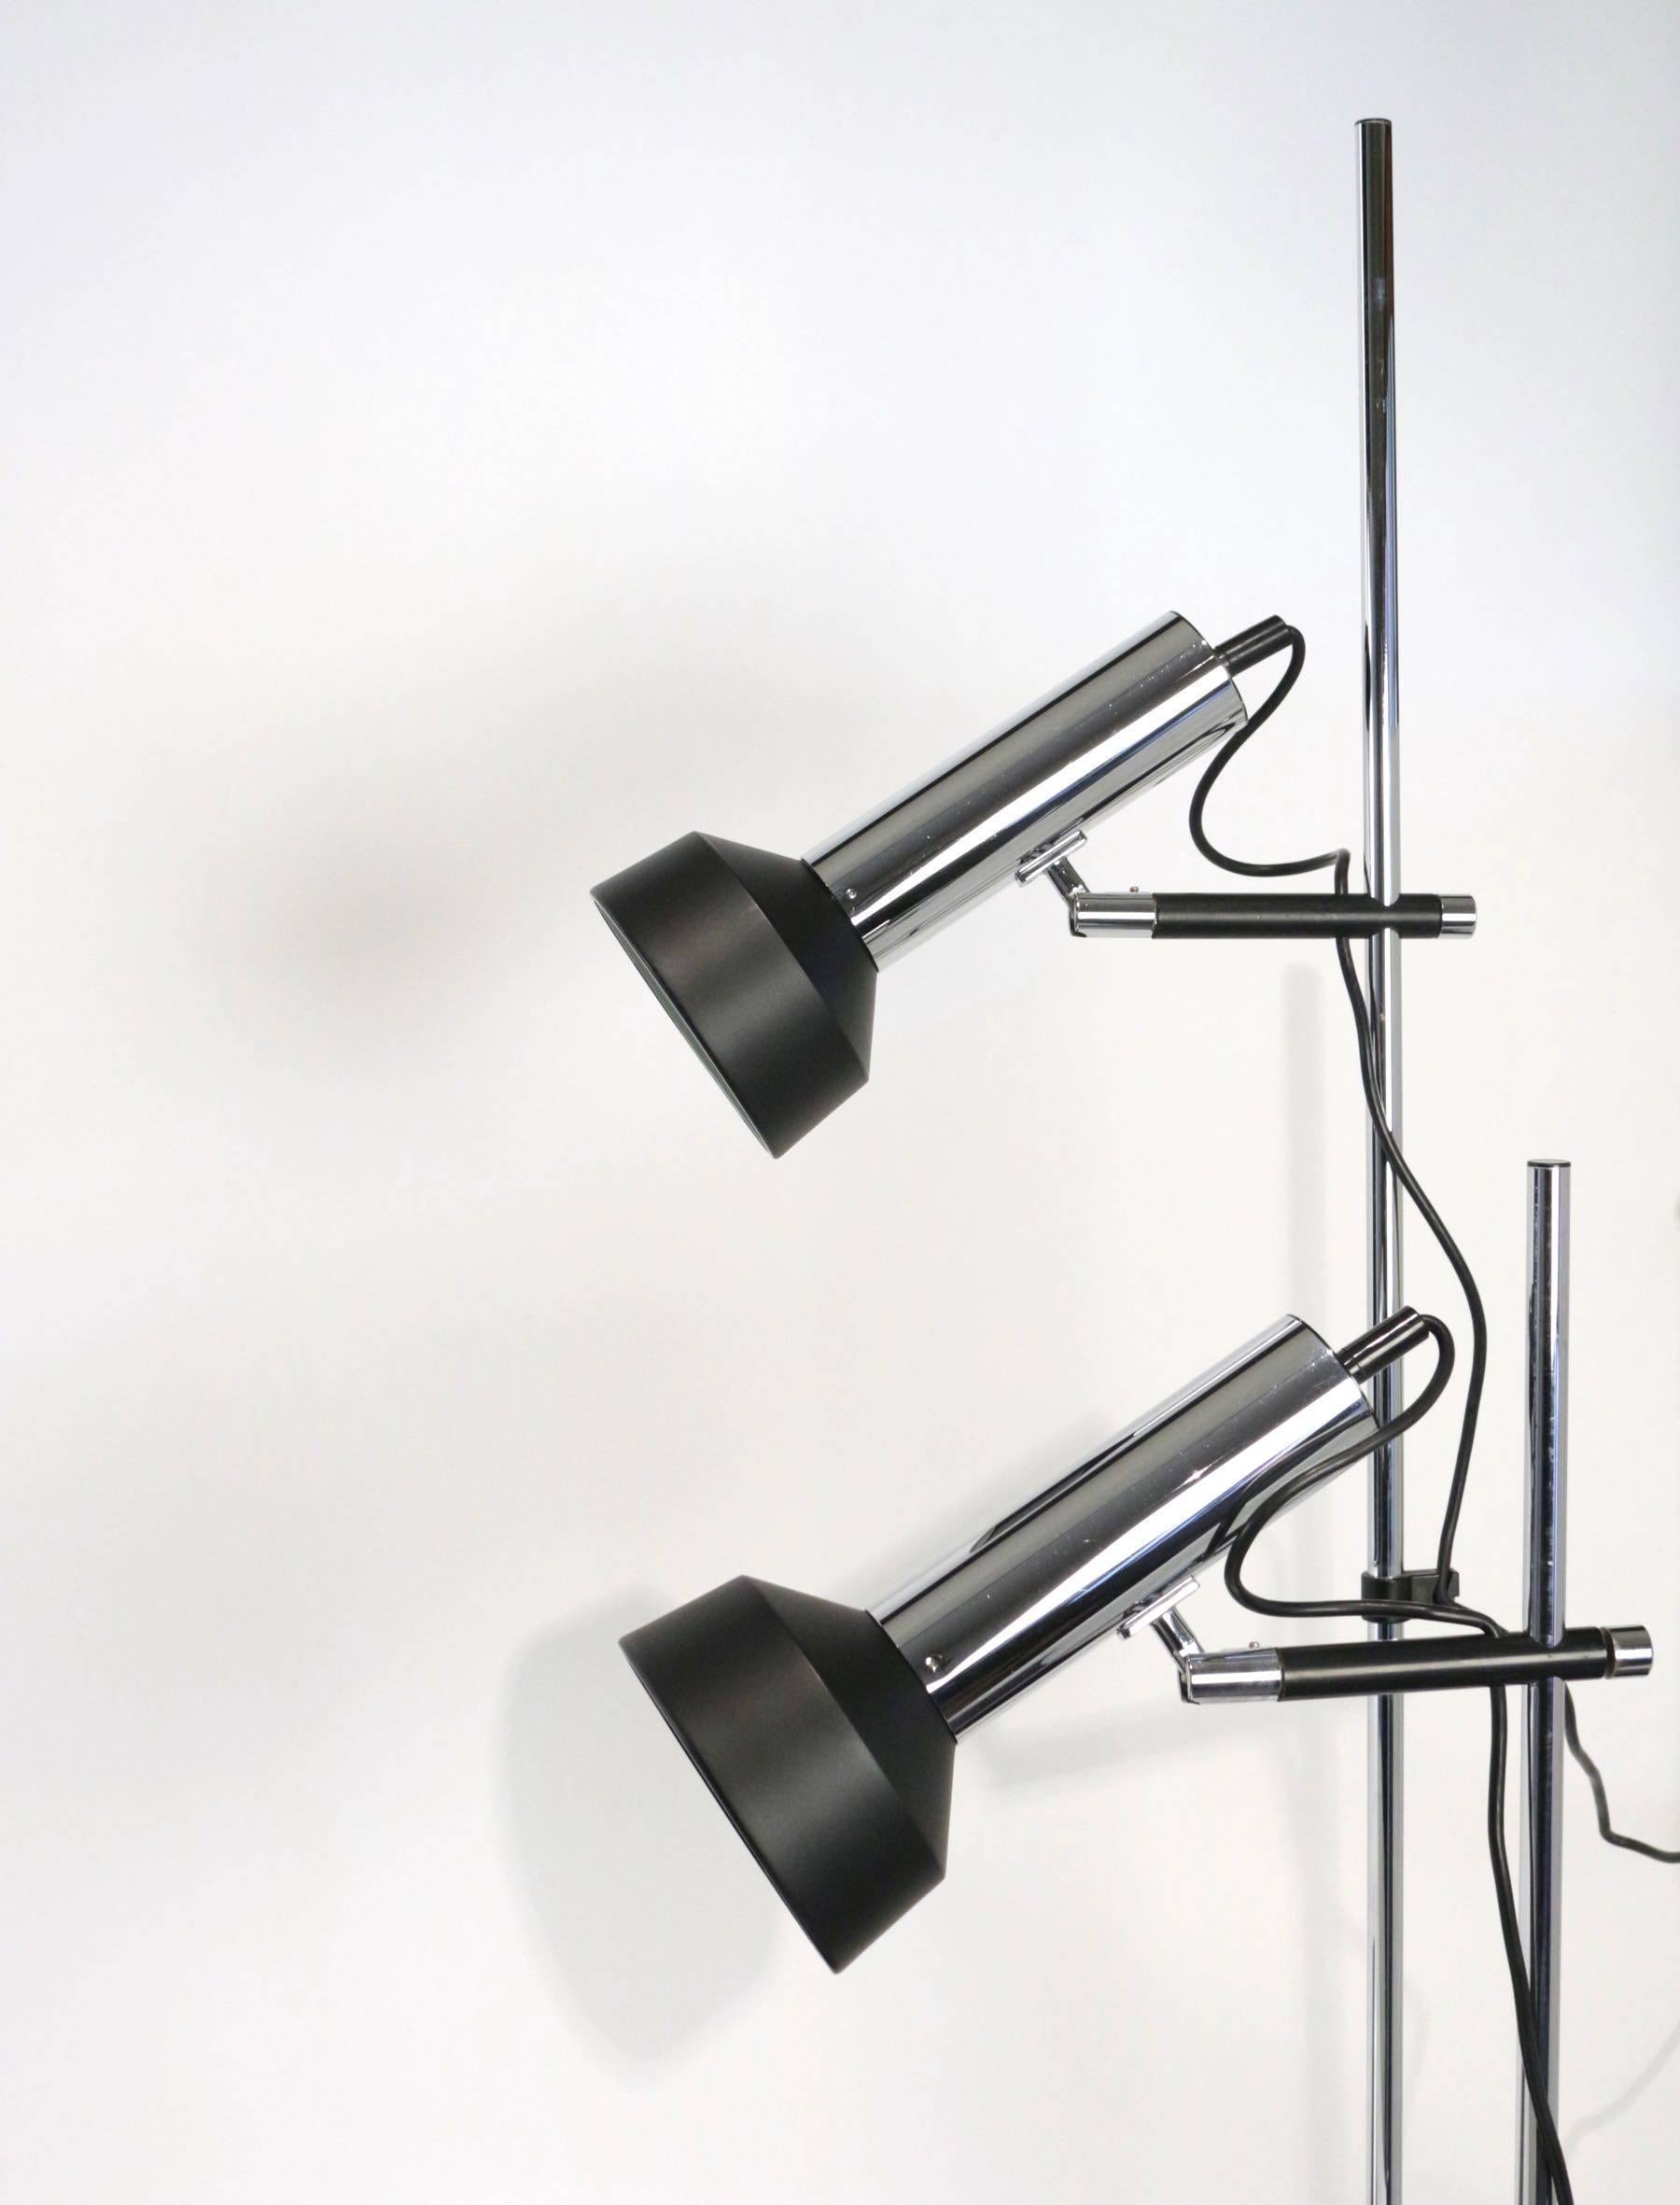 Composed of a long chromed metal rod equipped with a small horizontal rod in the upper part that fits into the vertical rod and allows to adjust the height of the lamp.
The small rod is dressed with a light source consisting of a silver metal